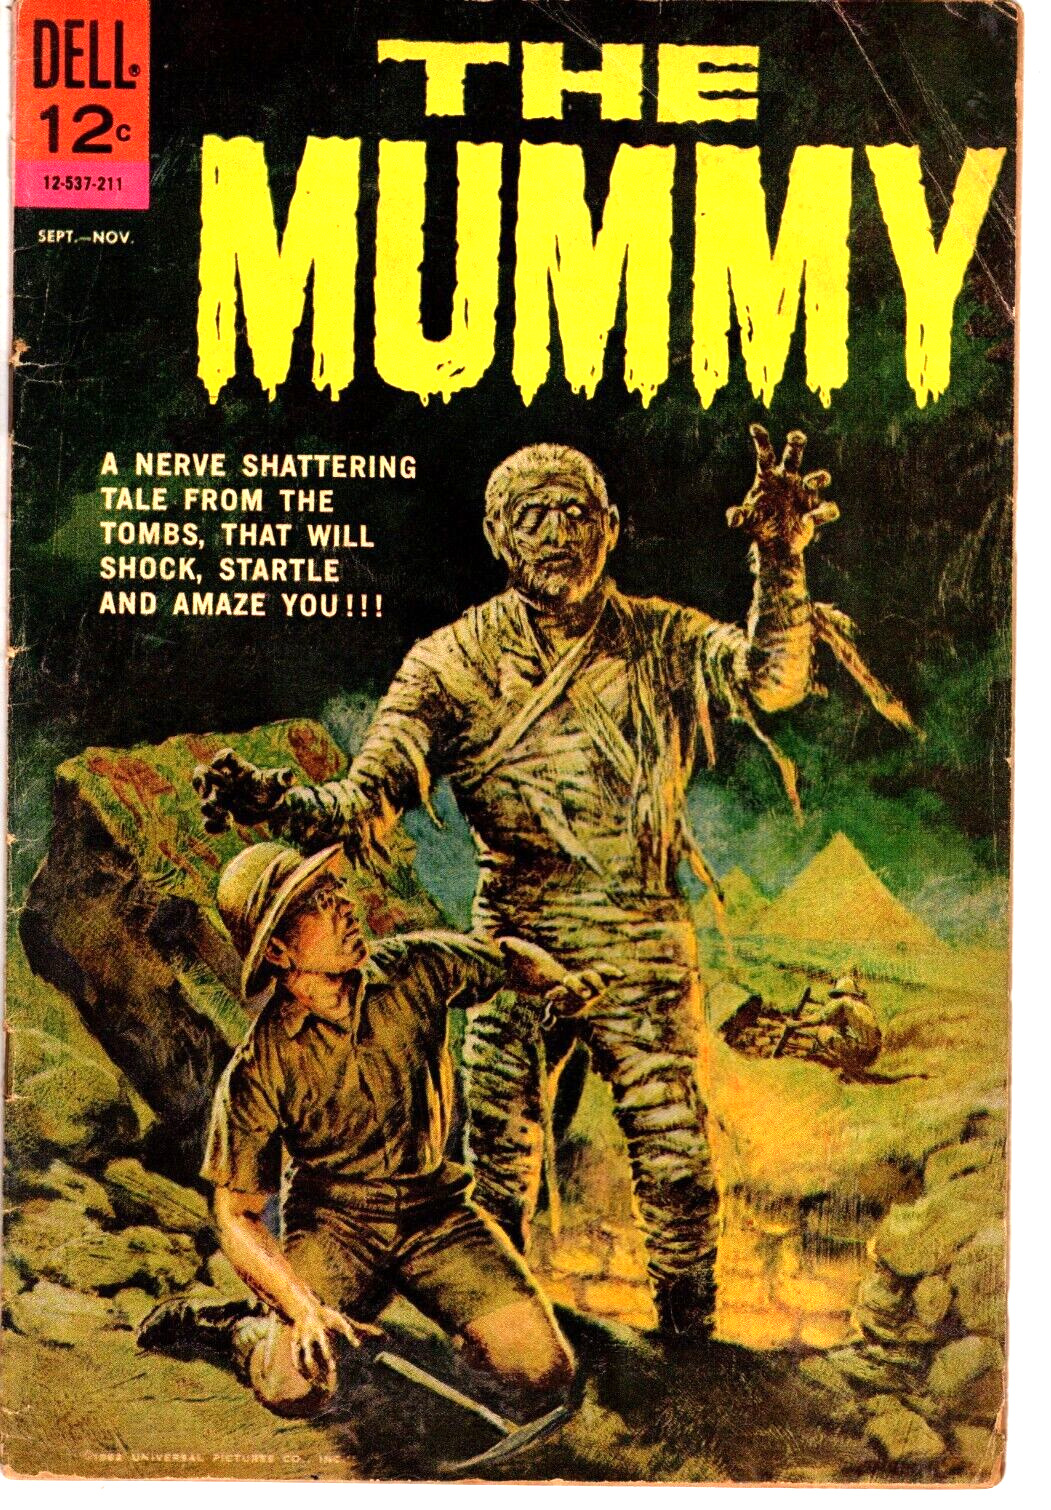 The Mummy # 12-537-211 (VG- 3.5) 1962 Universal Monsters Dell Comic 1st print